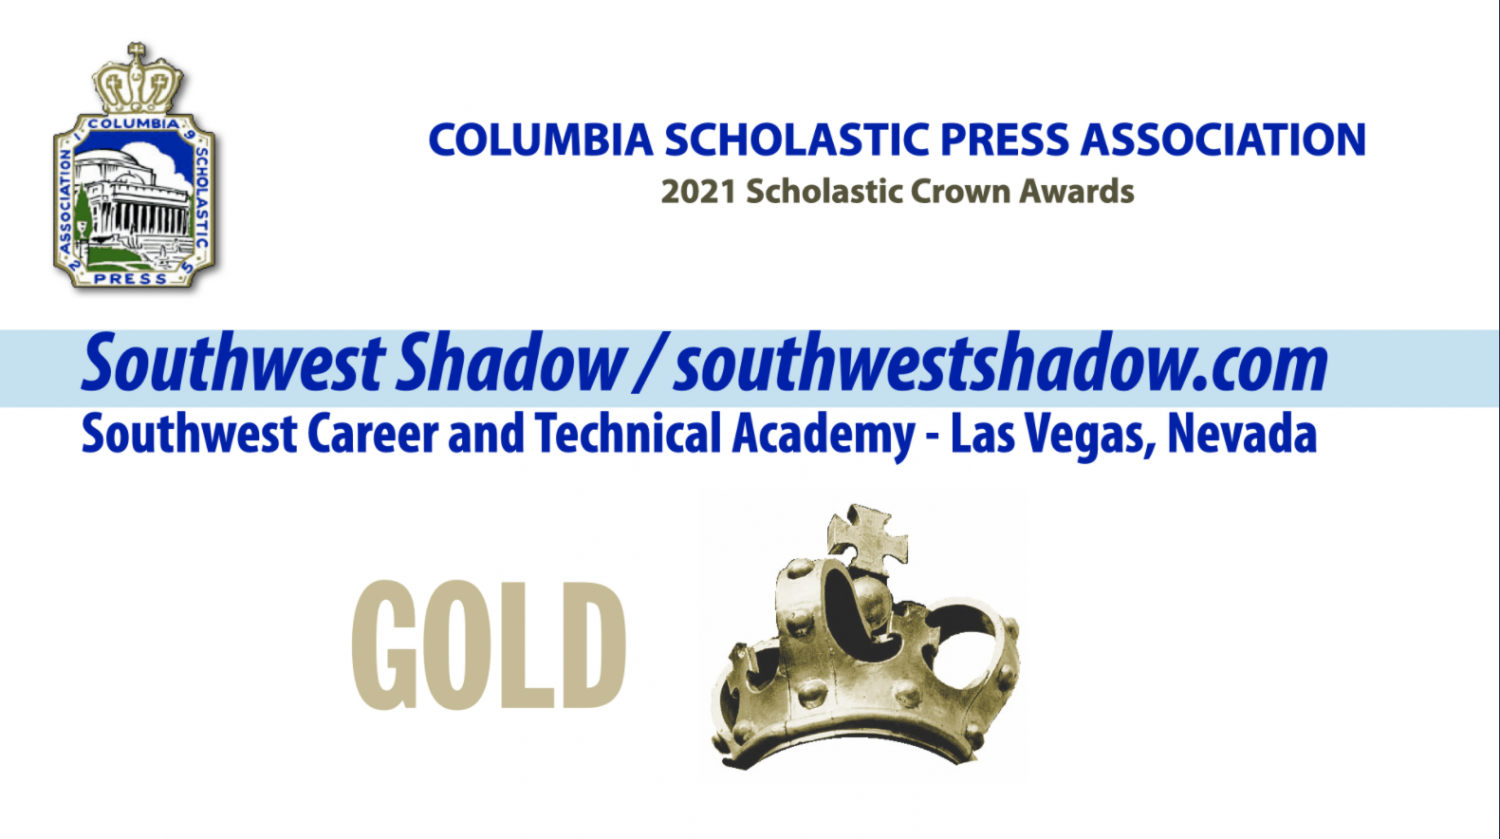 The+Scholastic+Crown+Awards+are+known+as+some+of+the+most+prestigious+honors+for+student+journalism+groups.+Photo+Credit%3A+Columbia+Scholastic+Press+Association